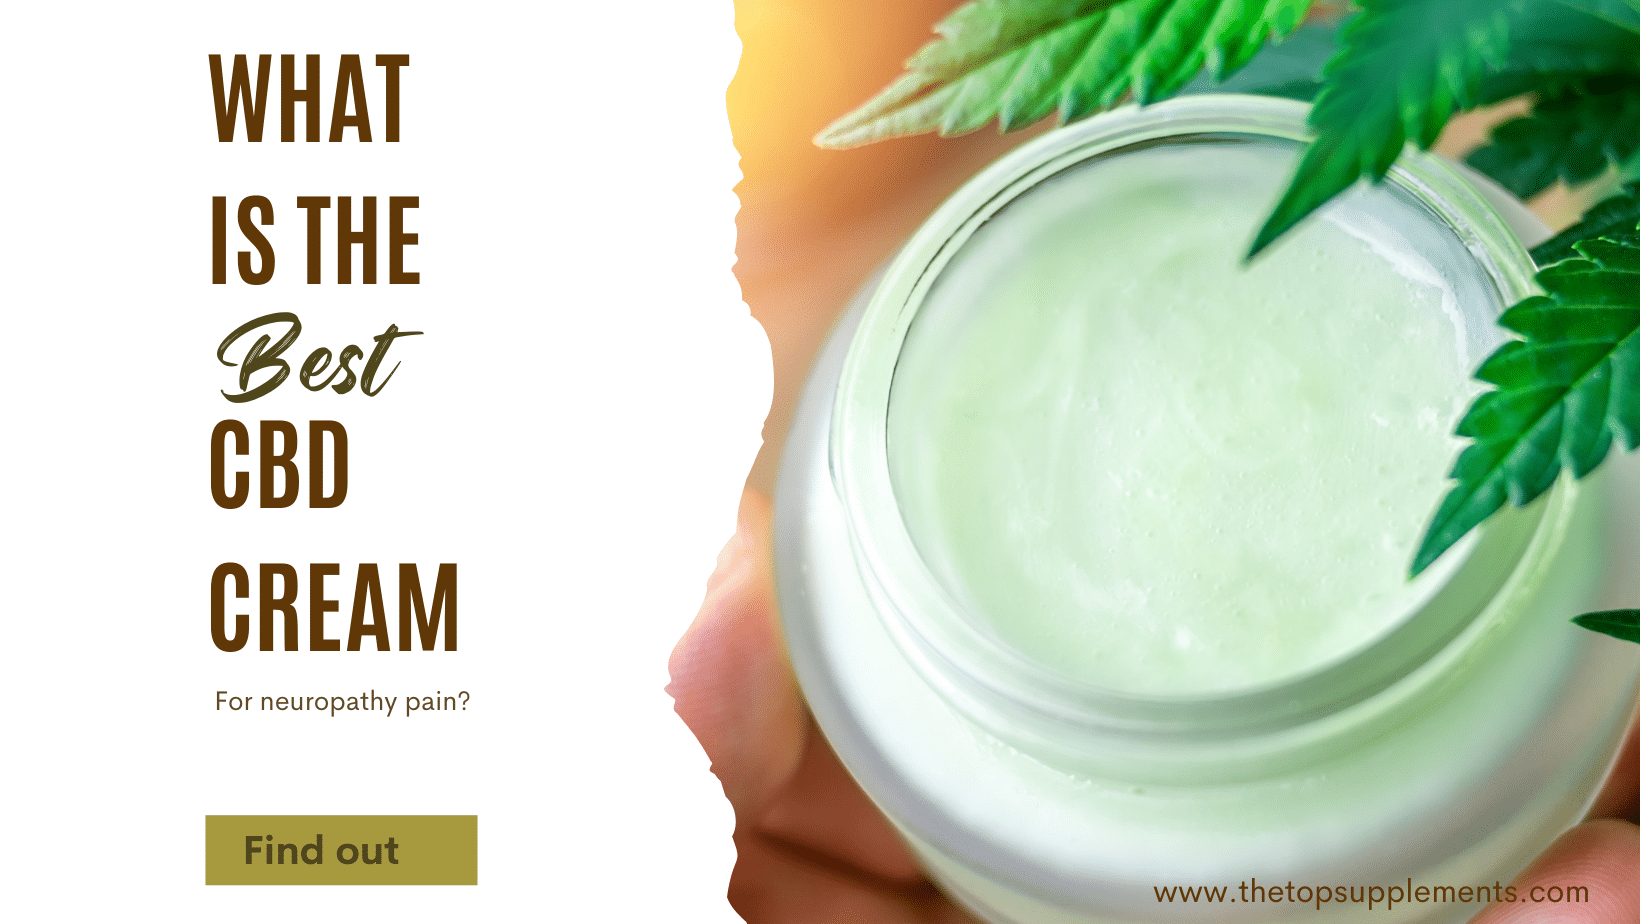 What is the Best CBD Cream for Neuropathy Pain? - The Top Supplements